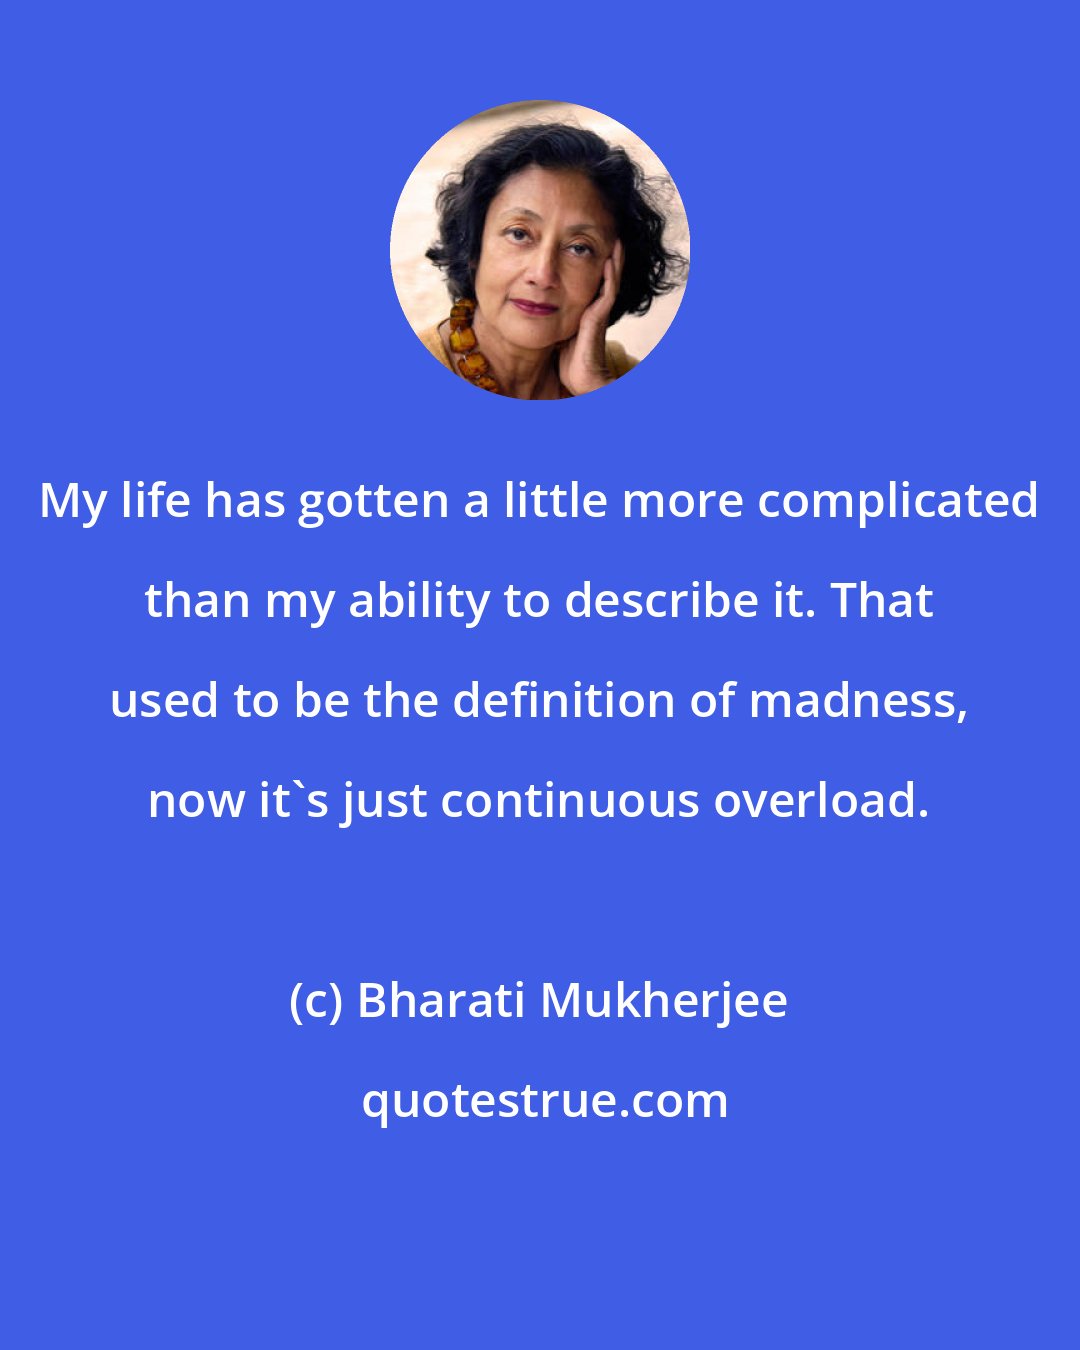 Bharati Mukherjee: My life has gotten a little more complicated than my ability to describe it. That used to be the definition of madness, now it's just continuous overload.